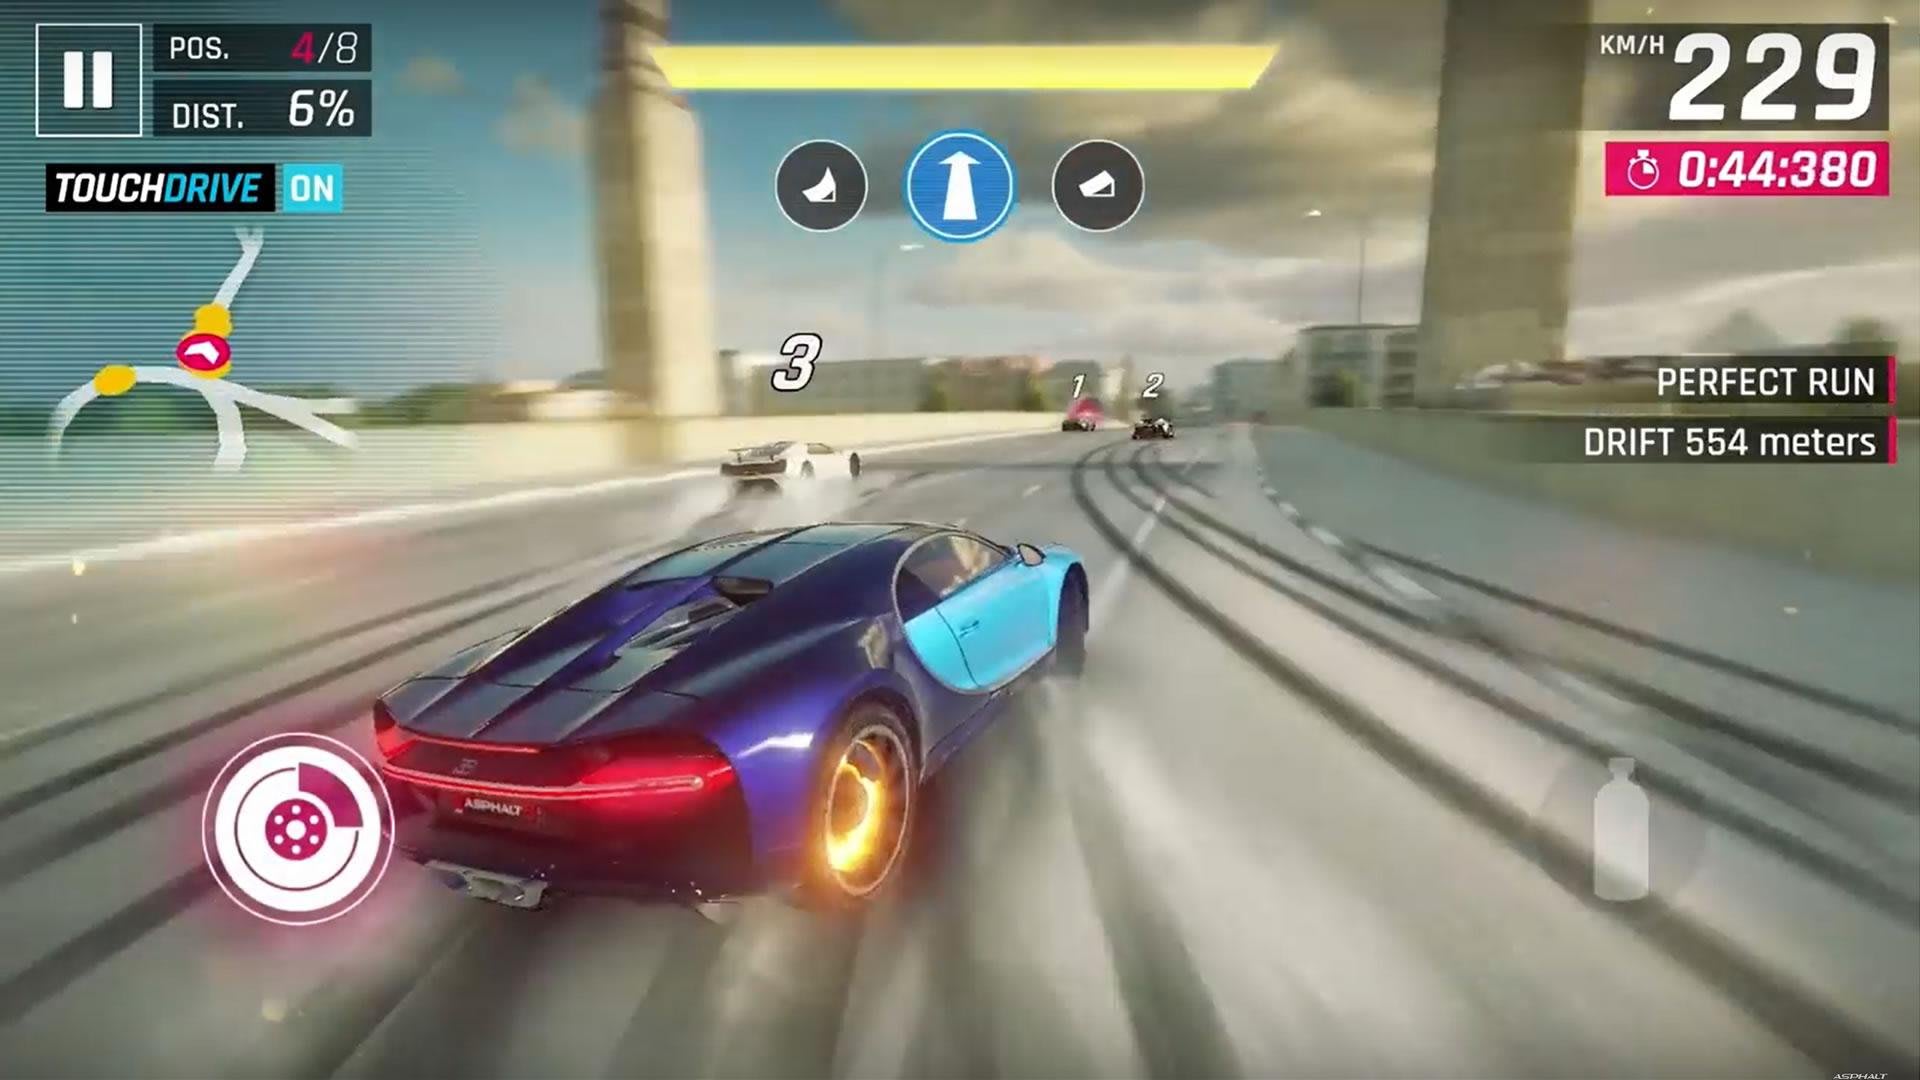 Asphalt 9: Legends cheats and tips - A full list of EVERY car in the game